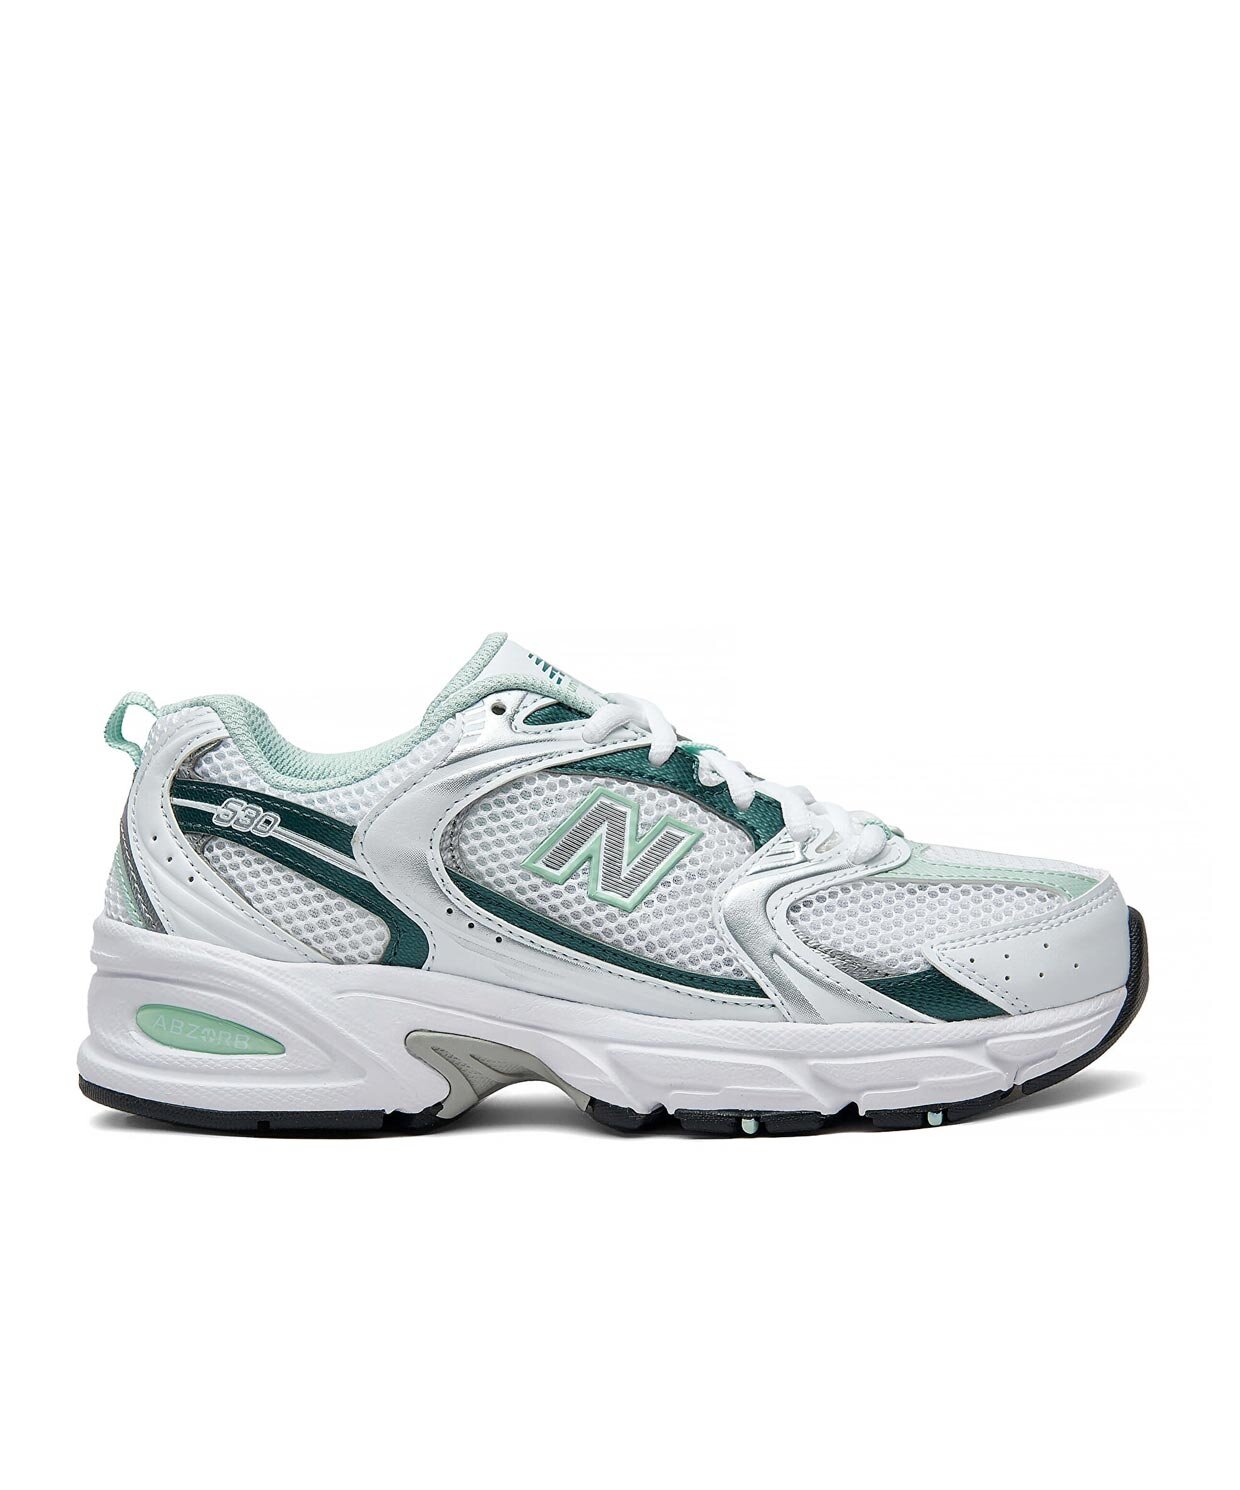 resm New Balance 530 Lifestyle Womens Shoes